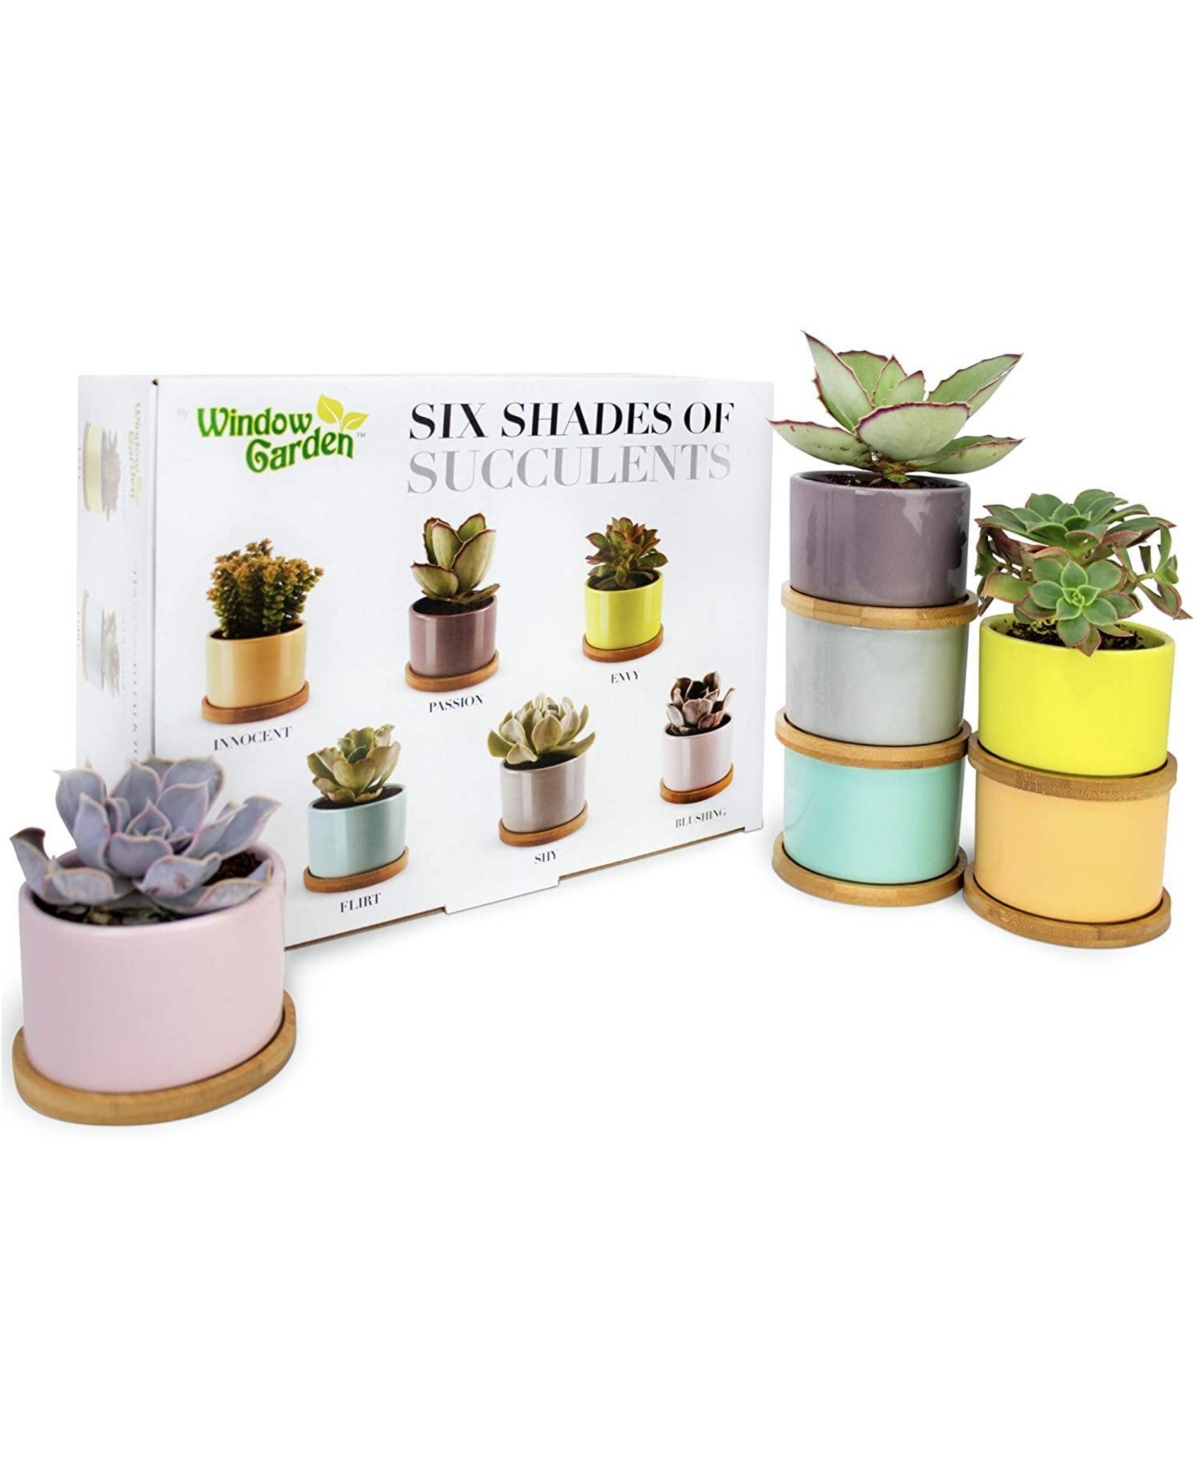 Set of 6 Shades of Succulents Planter Pots – Slip Your Plants Into Something More Colorful. Create a Stunning Display That'll Surely Exc